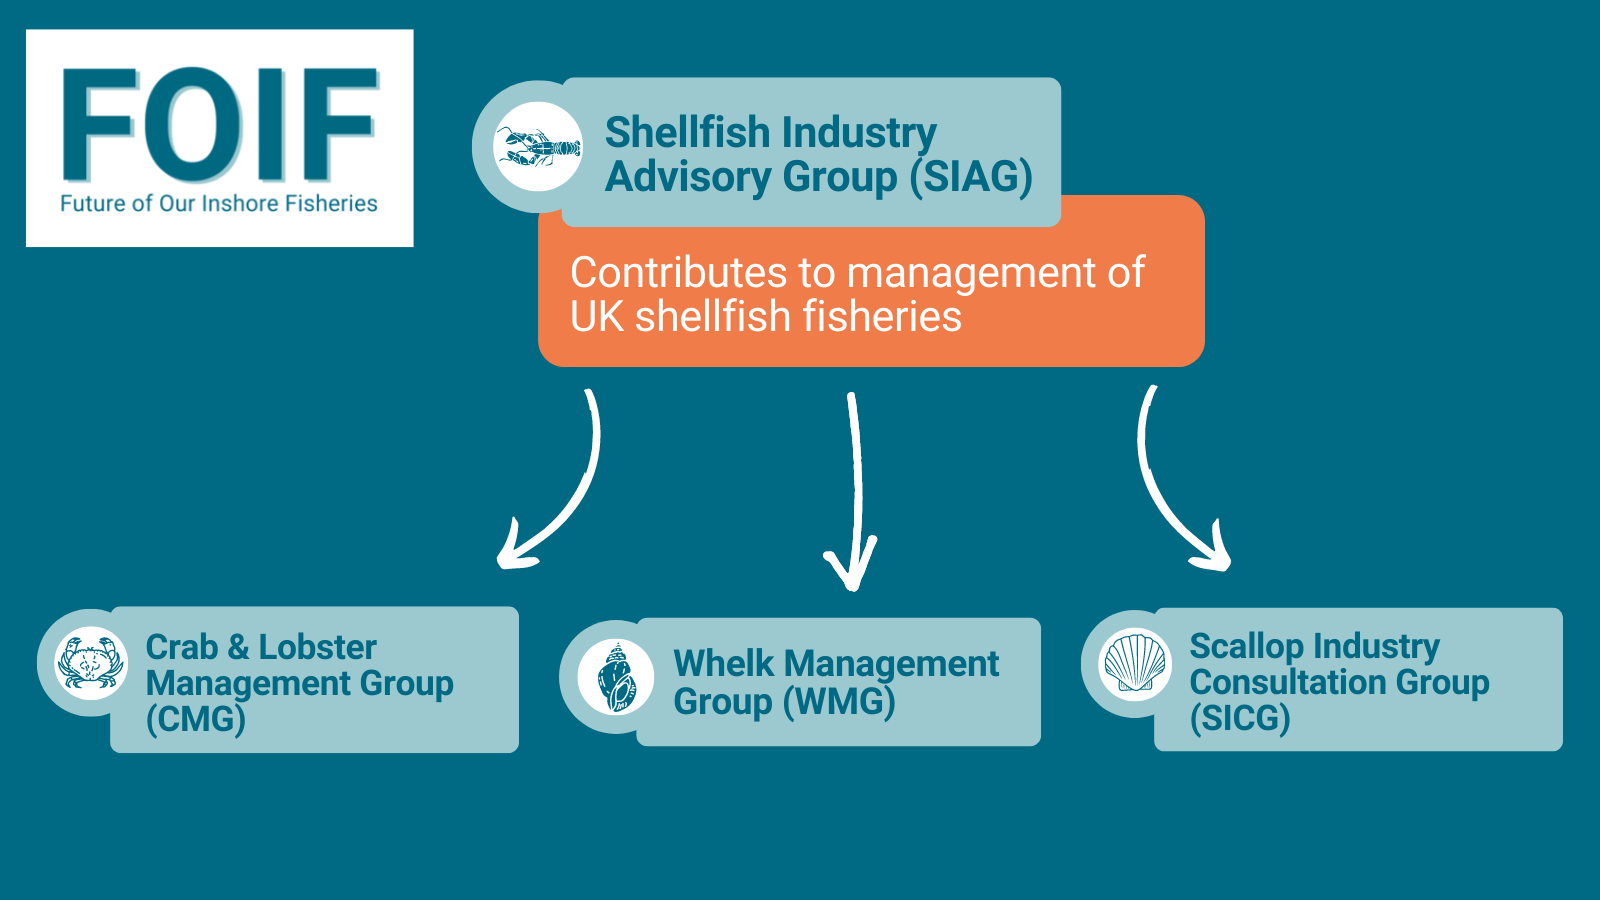 Infographic showing how the SIAG contributes to management on UK shellfish fisheries via links with the CMG, WMG and SIGC